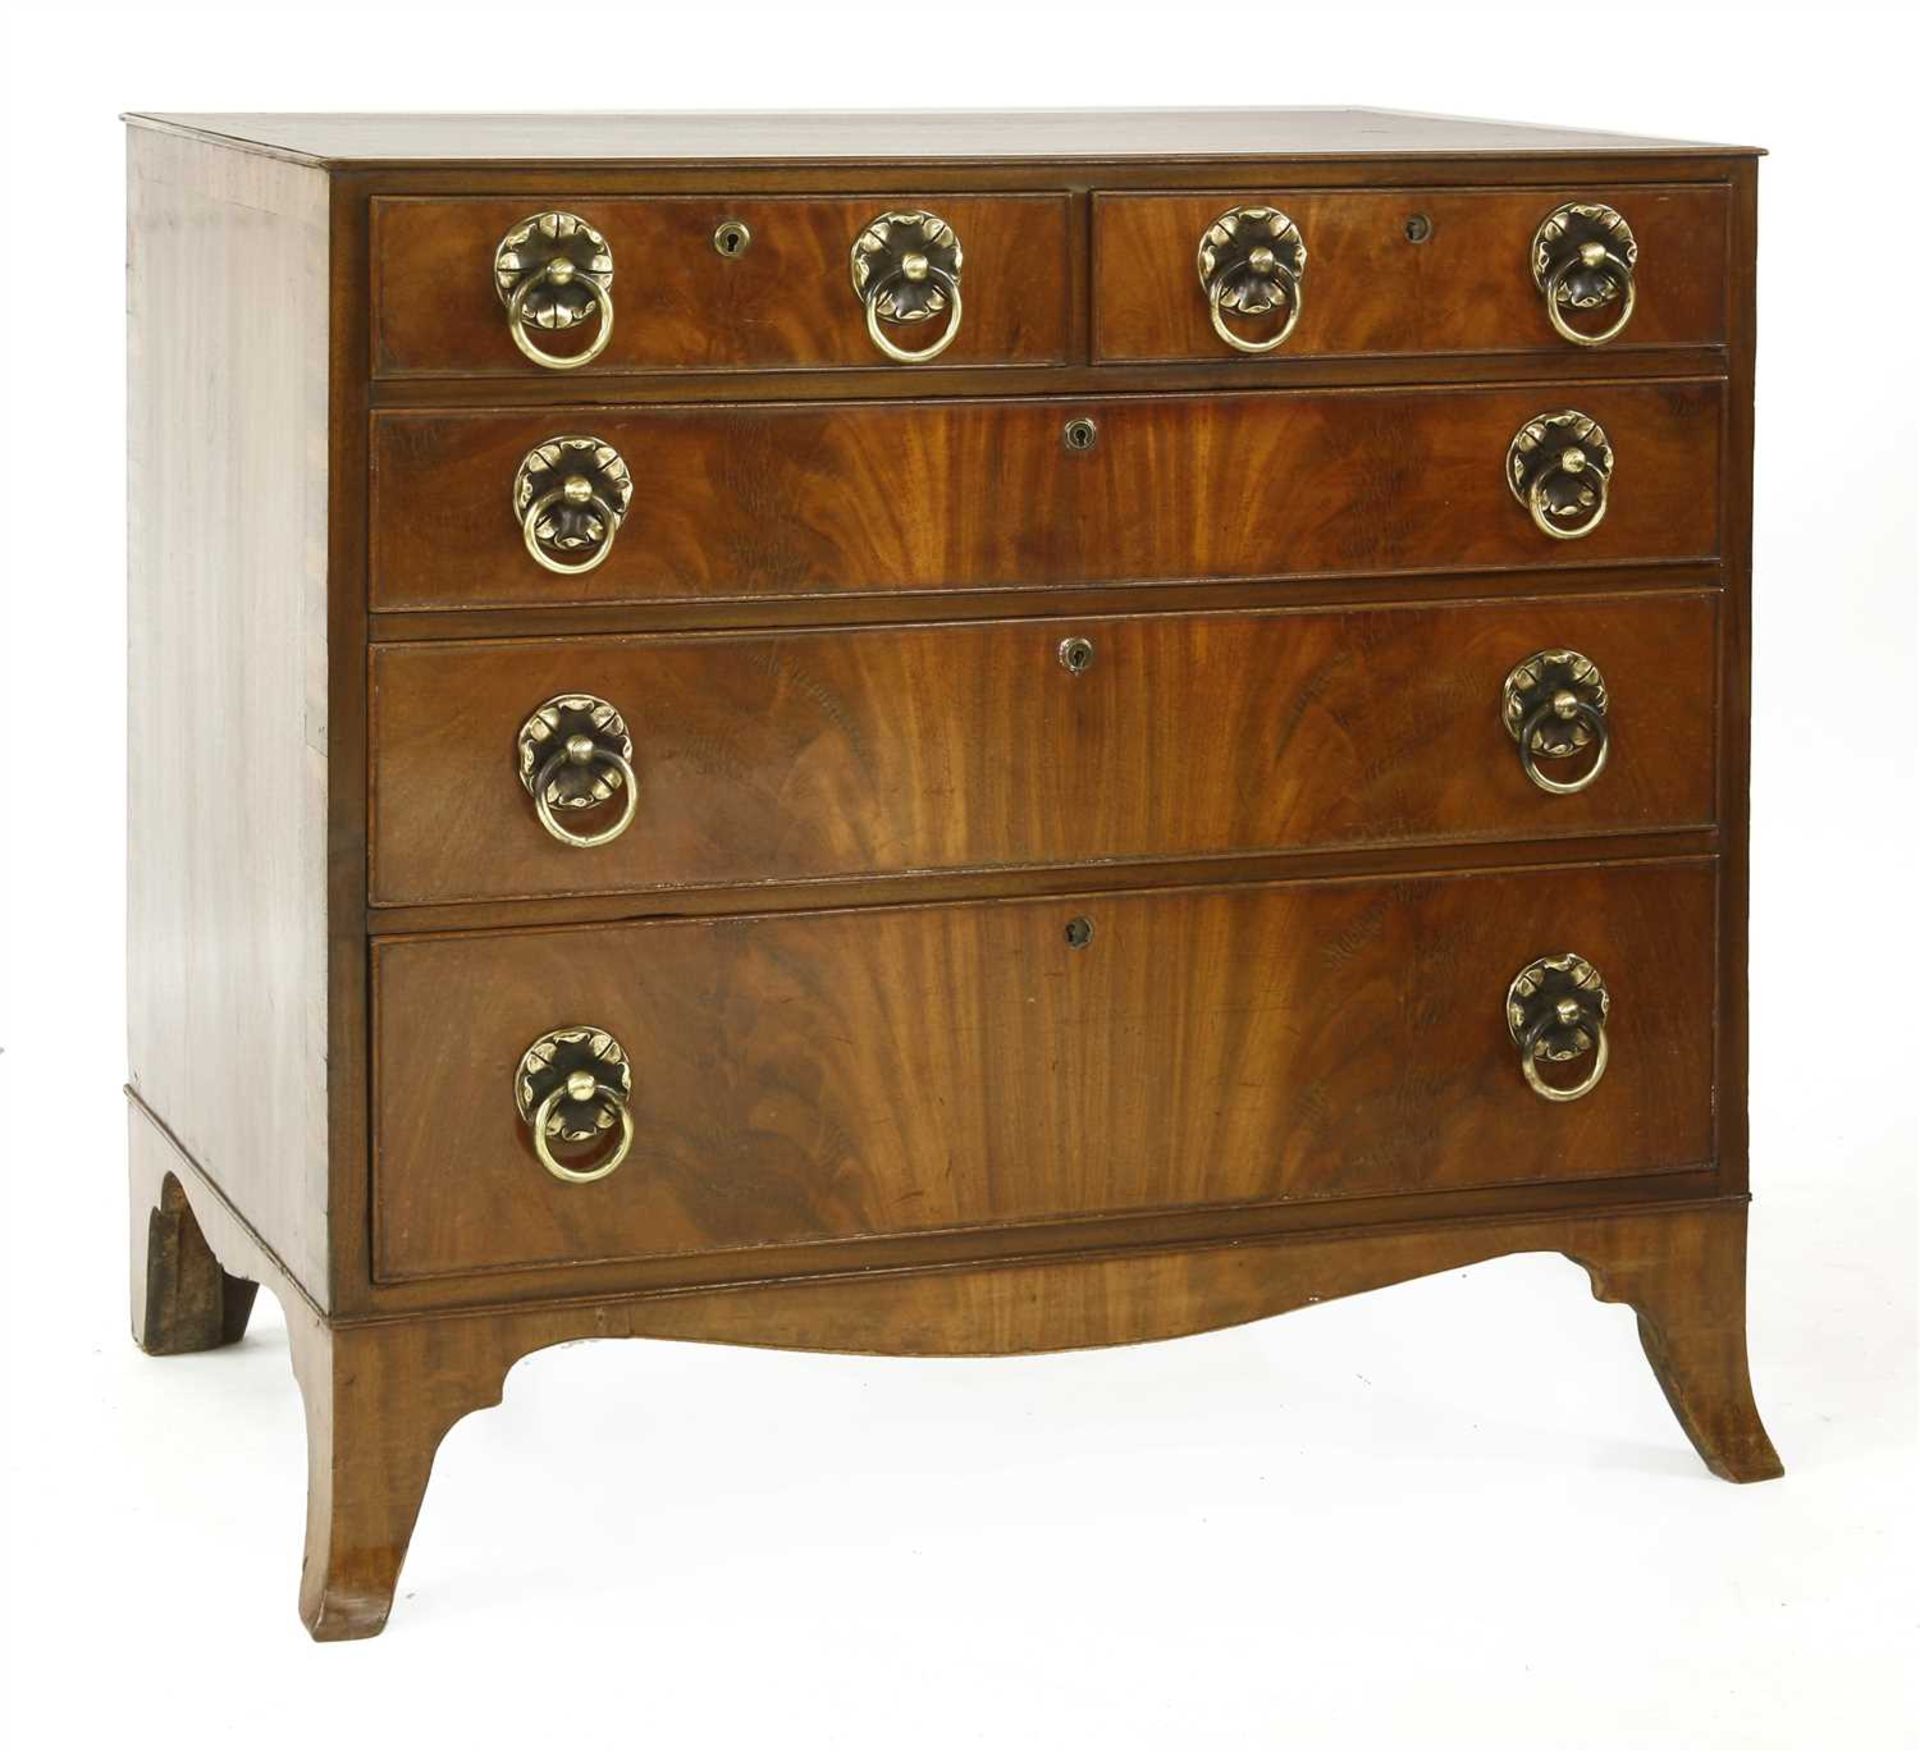 A George III and later flame mahogany chest of drawers